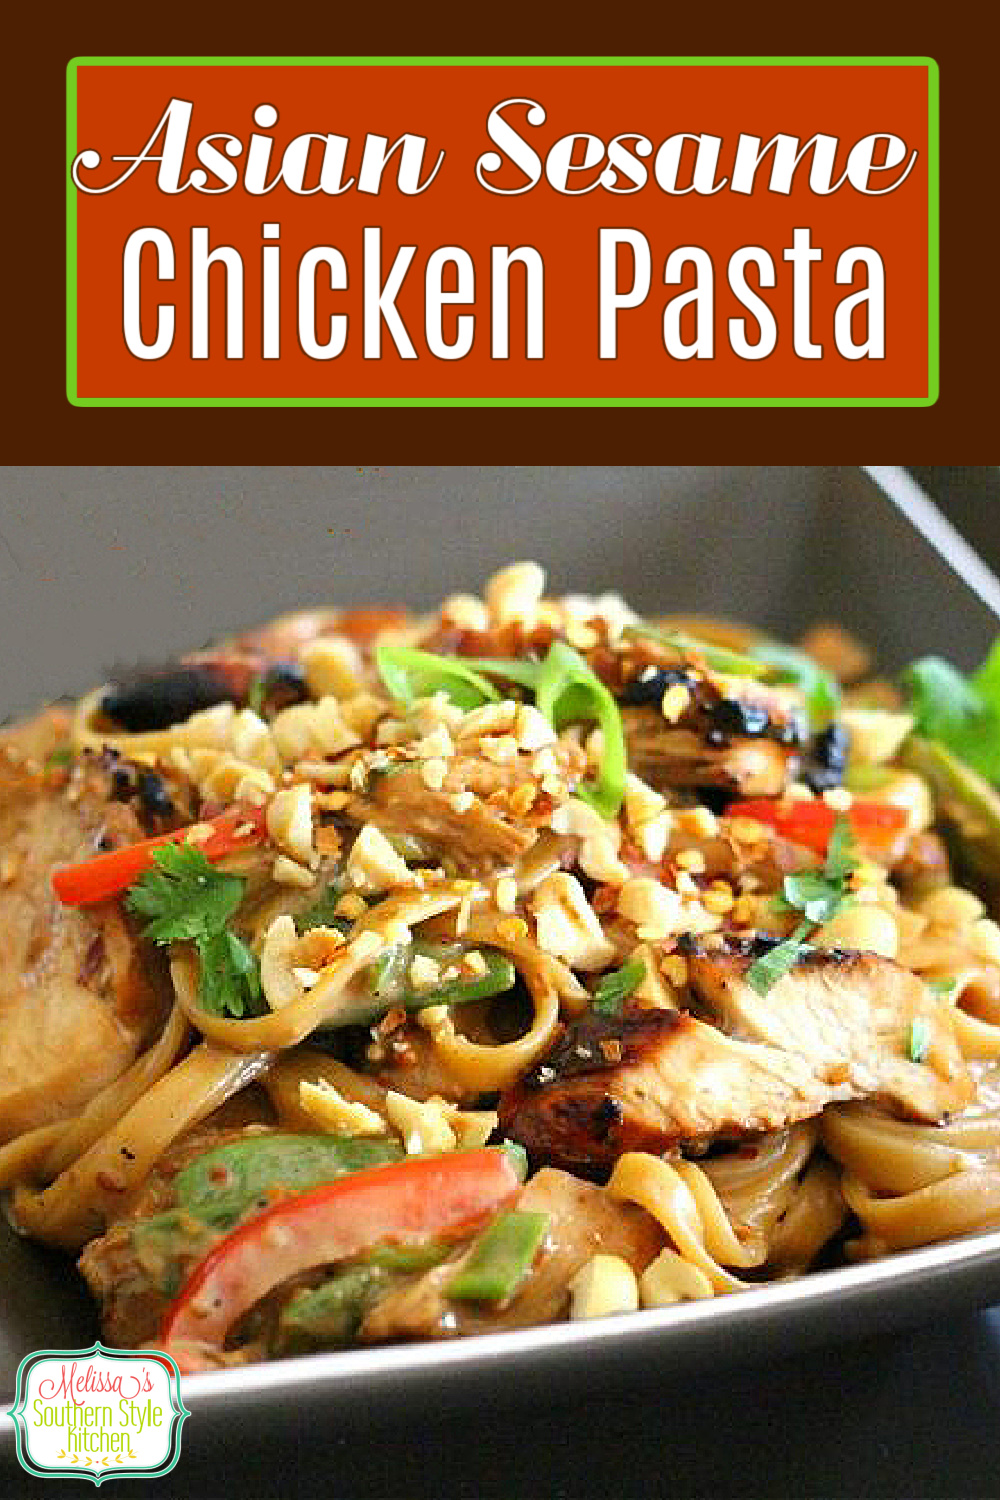 This Asian Sesame Chicken Pasta is delicious warm, at room temperature or chilled. #asianchicken #sesamechicken #easychickenrecipes #sesamepasta #pastarecipes #dinner #dinnerideas #southernfood #southernrecipes #pasta via @melissasssk